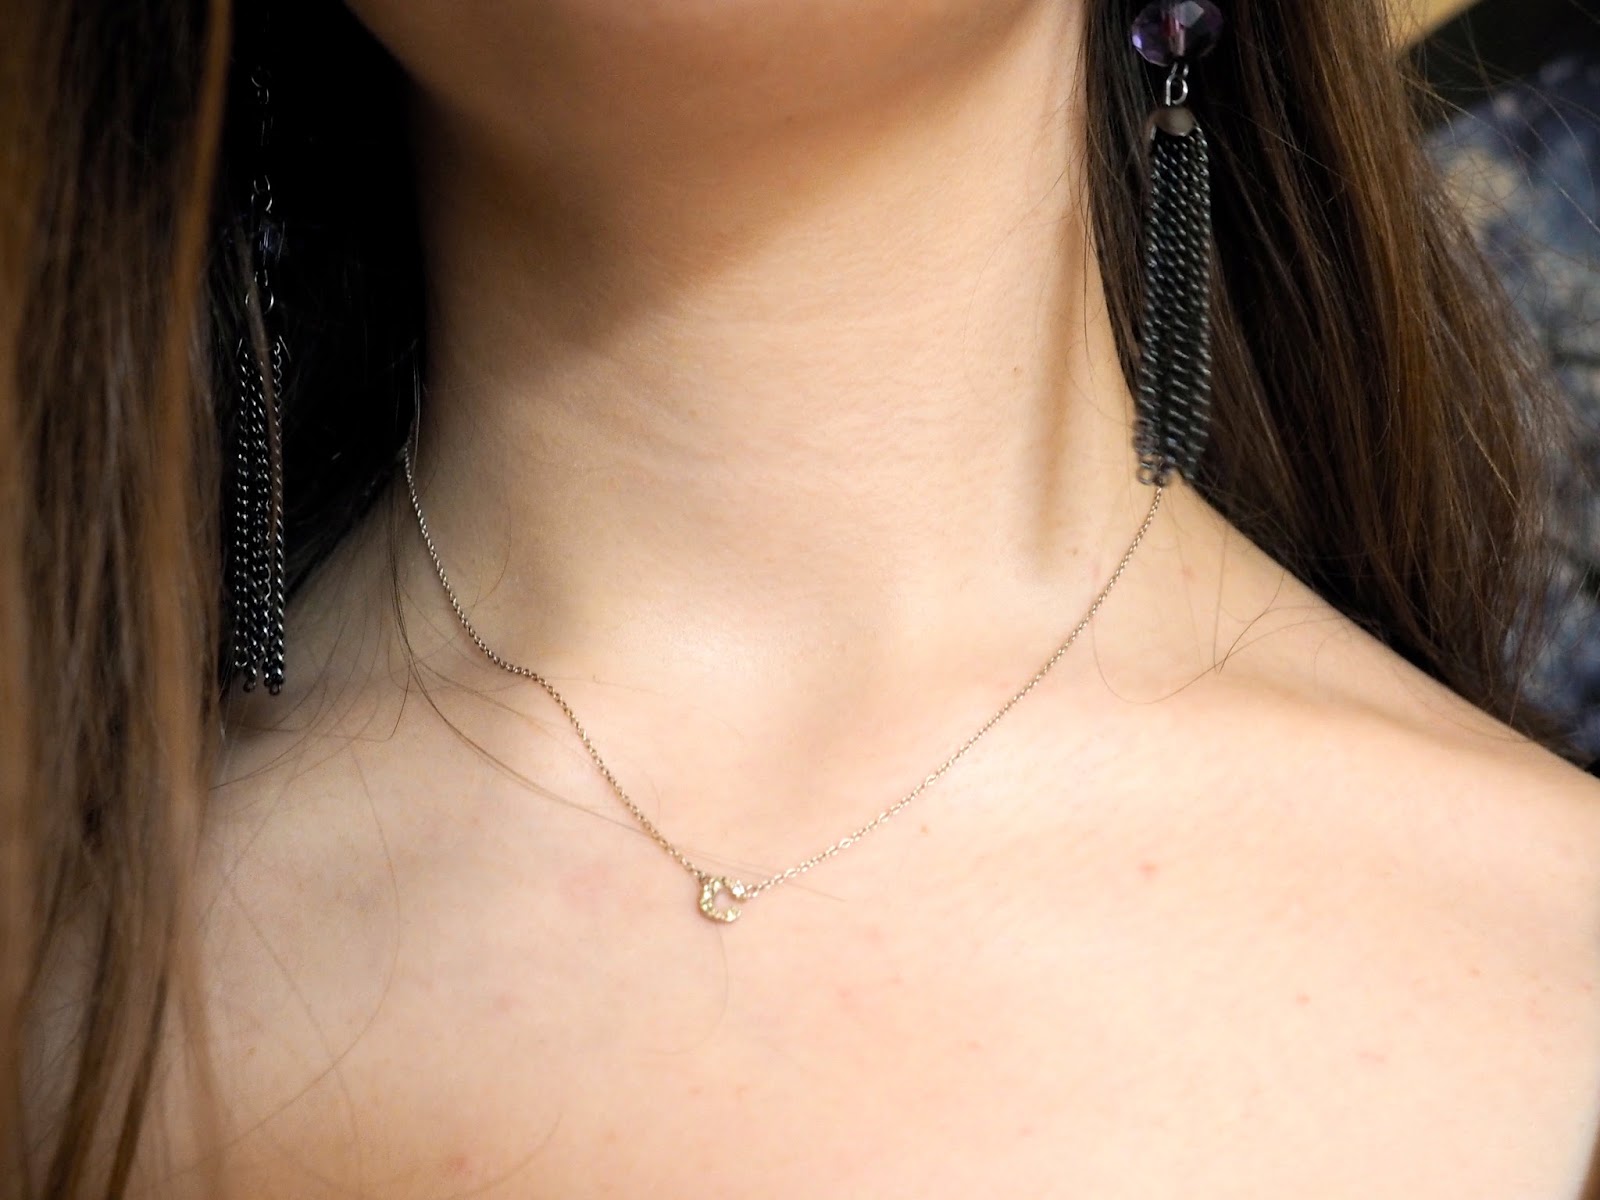 Black Velvet outfit jewellery details | silver letter C necklace and chunky purple bead earrings